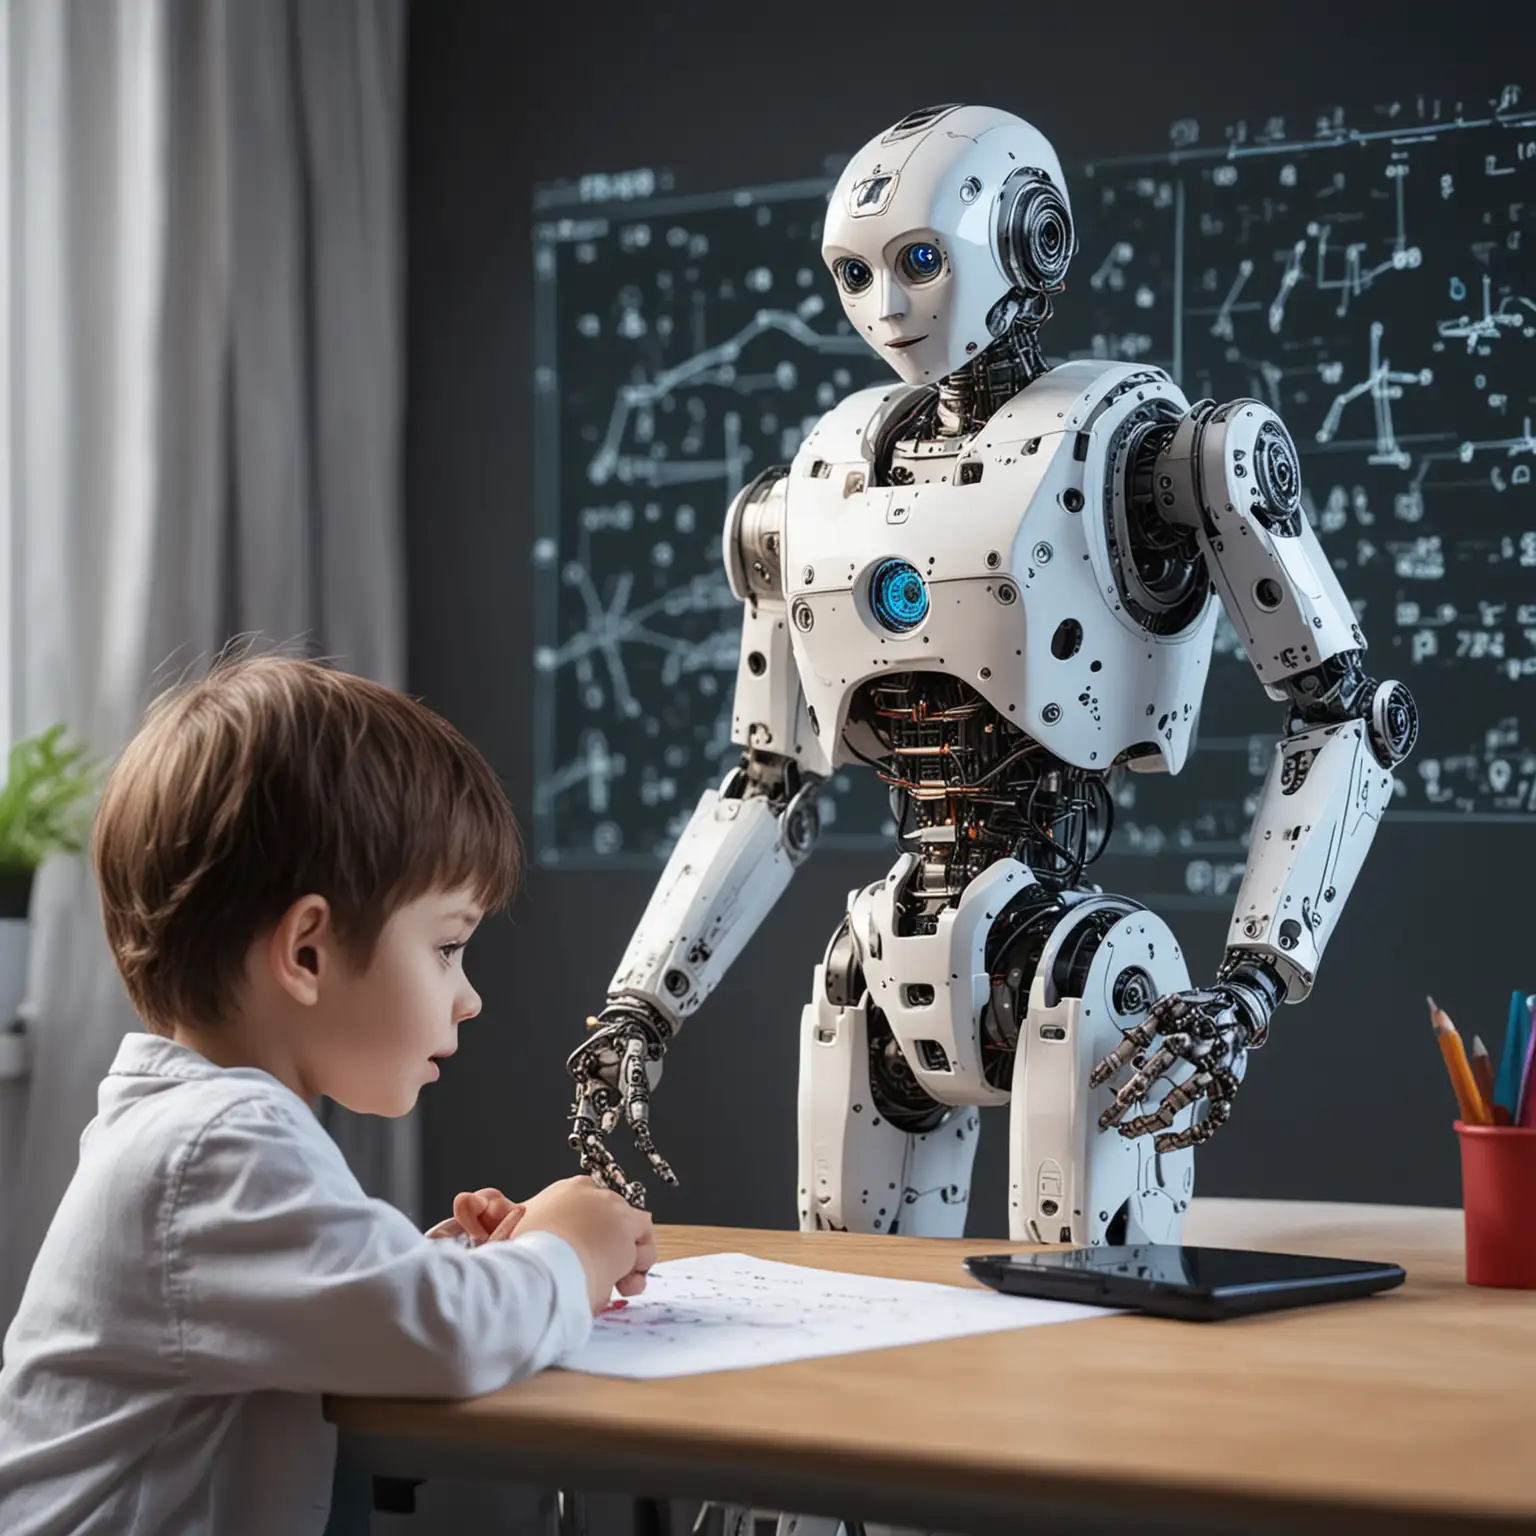 children are learning mathematics with AI assistance, robot shows dynamic charts